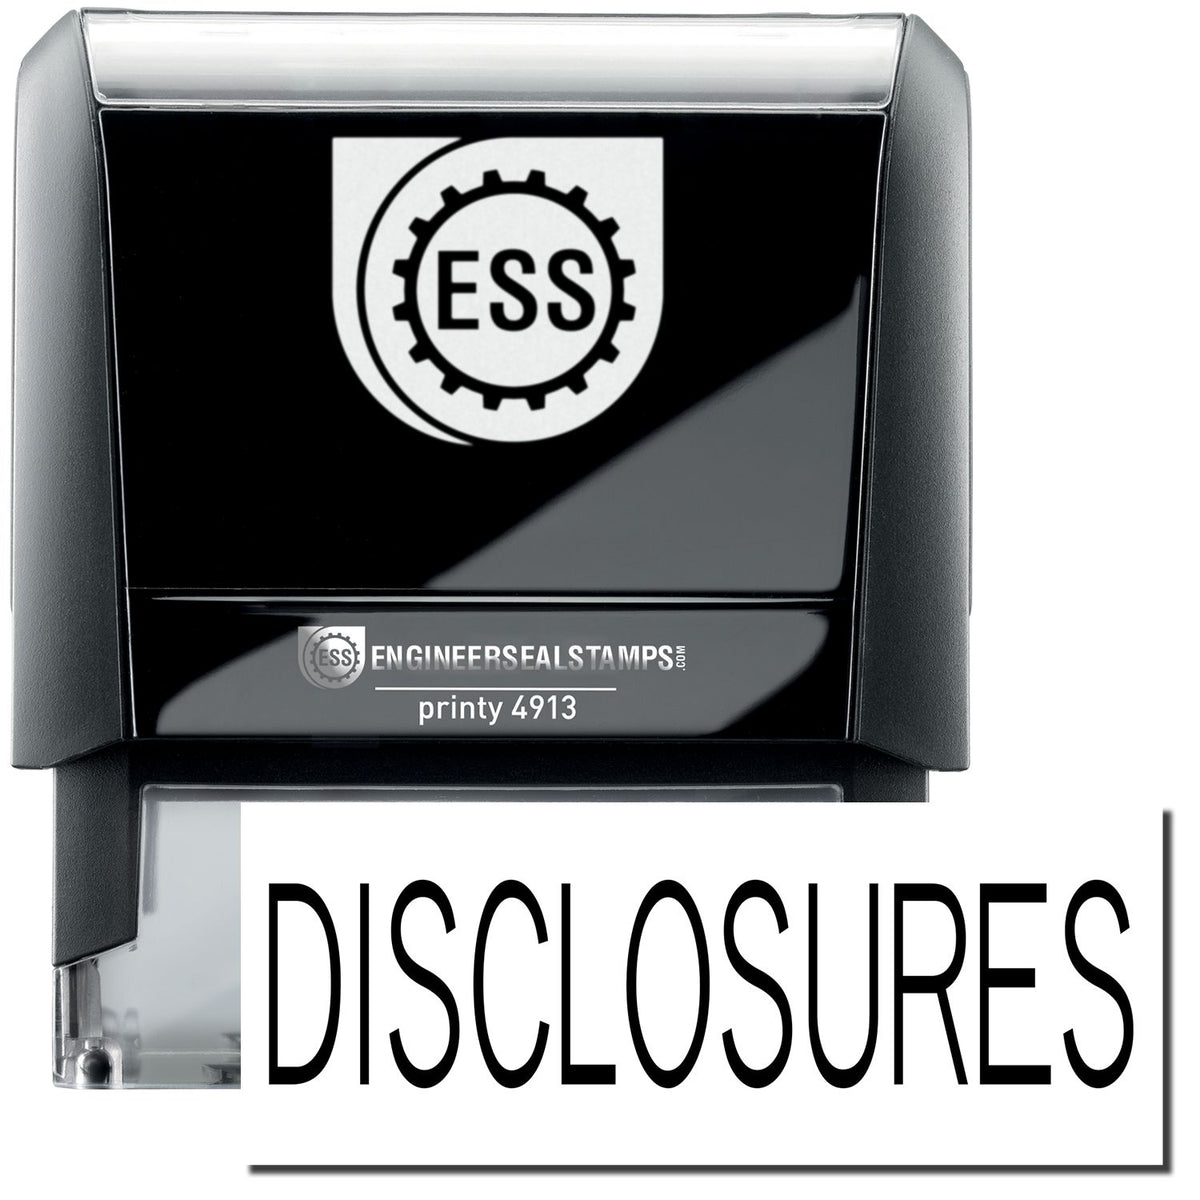 A self-inking stamp with a stamped image showing how the text &quot;DISCLOSURES&quot; in a large bold font is displayed by it.